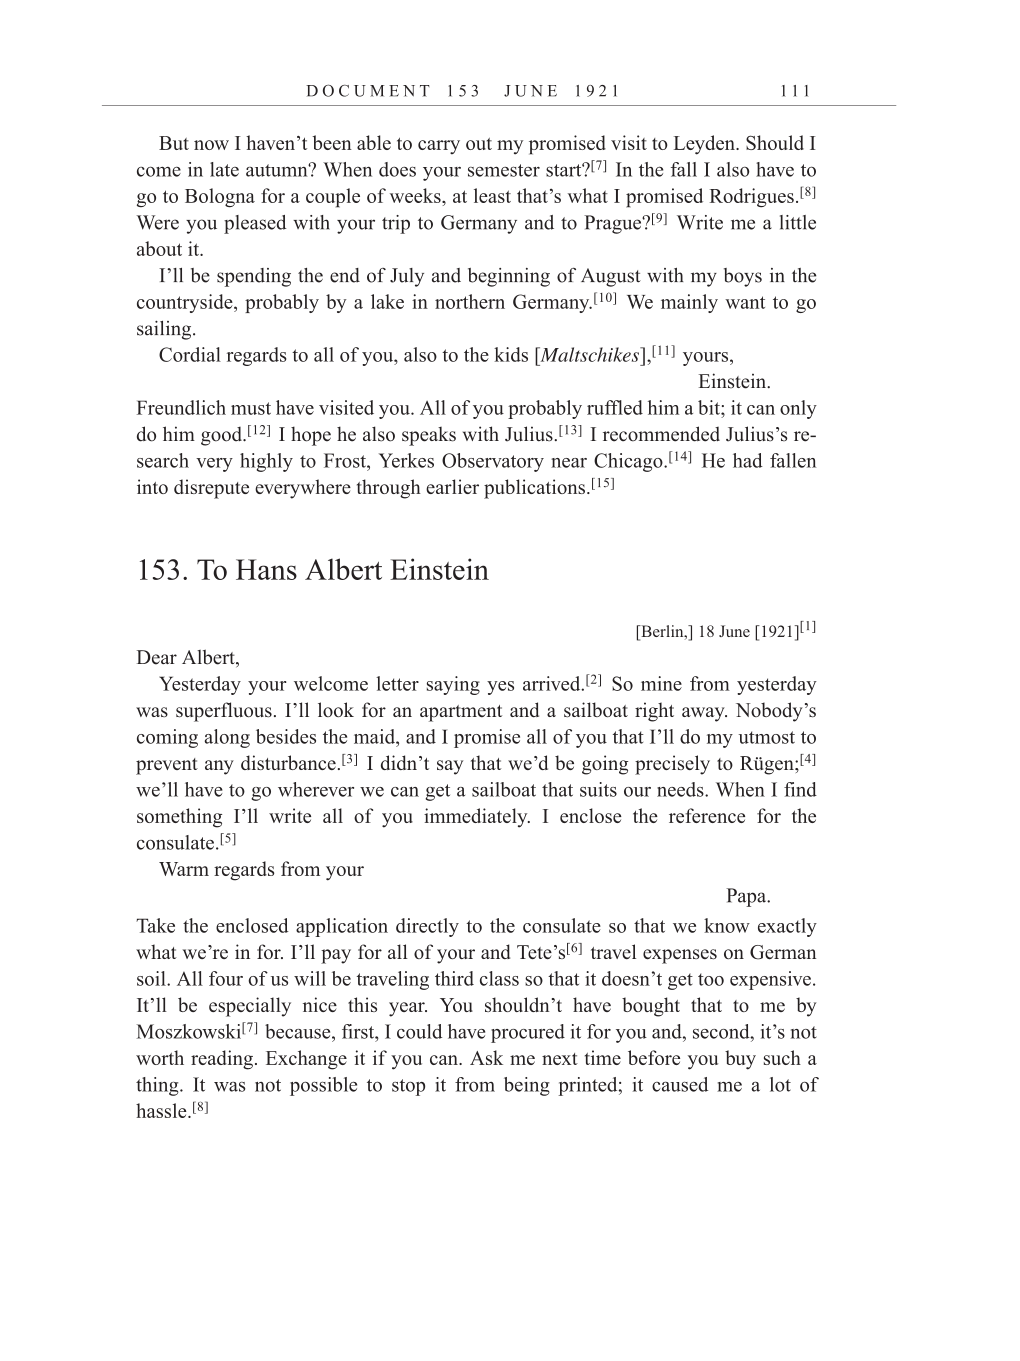 Volume 12: The Berlin Years: Correspondence, January-December 1921 (English translation supplement) page 111